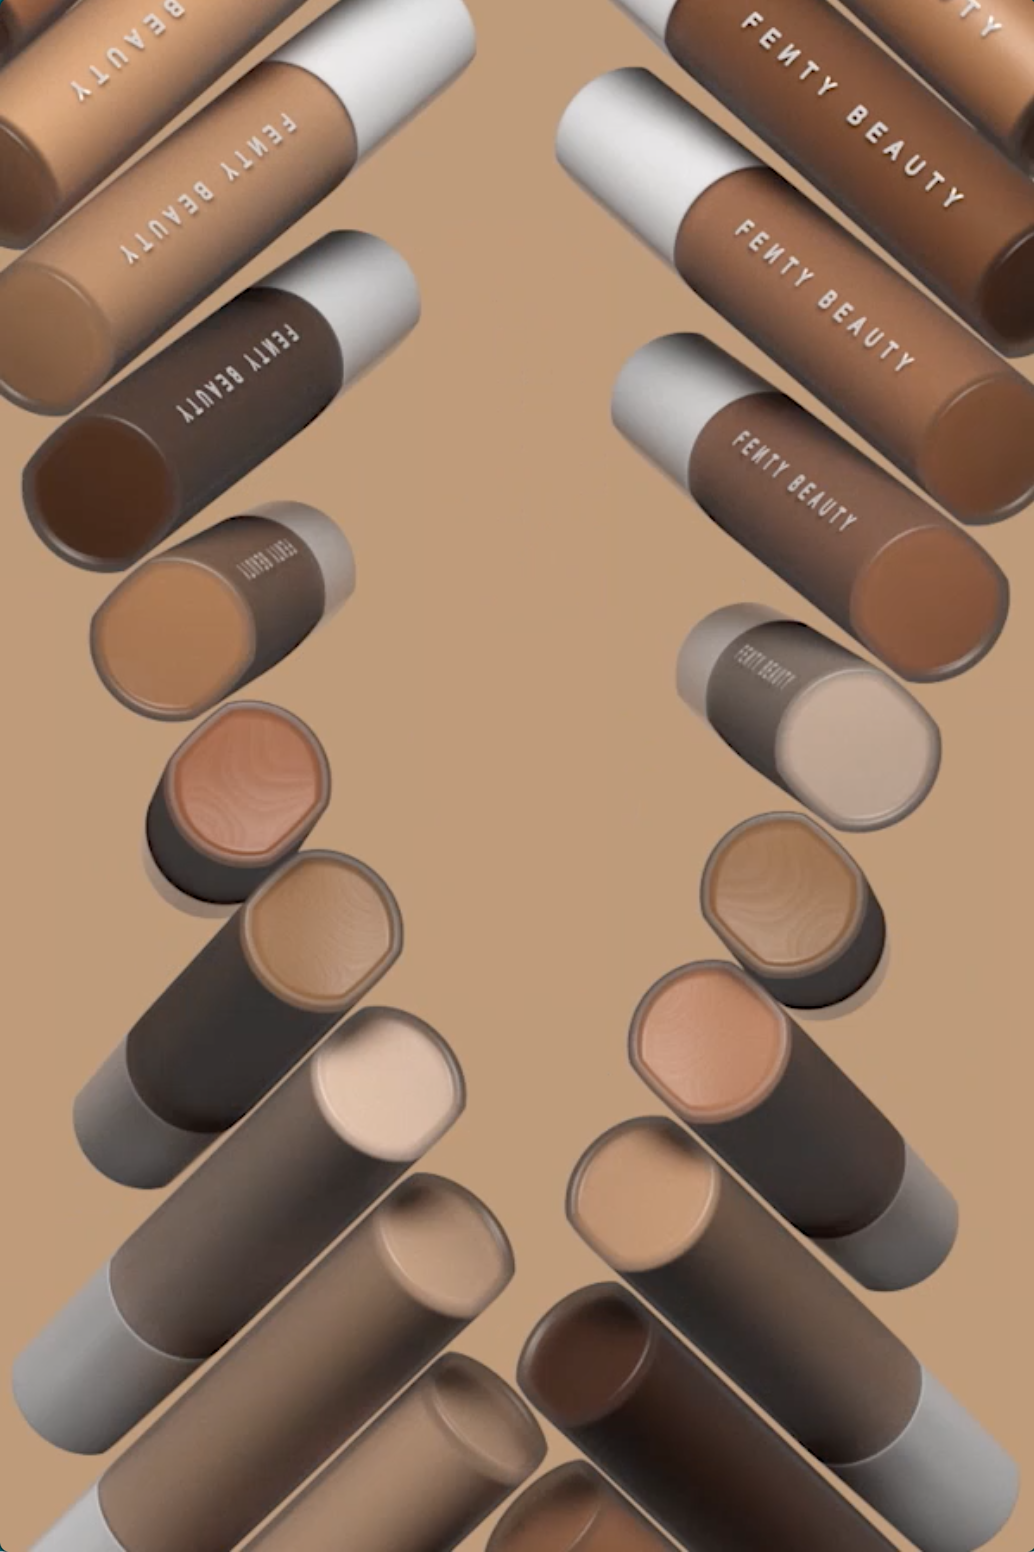 Fenty Concealer '19 V2 Video - Fenty Concealer '19 V2 Video -   19 beauty Products model ideas